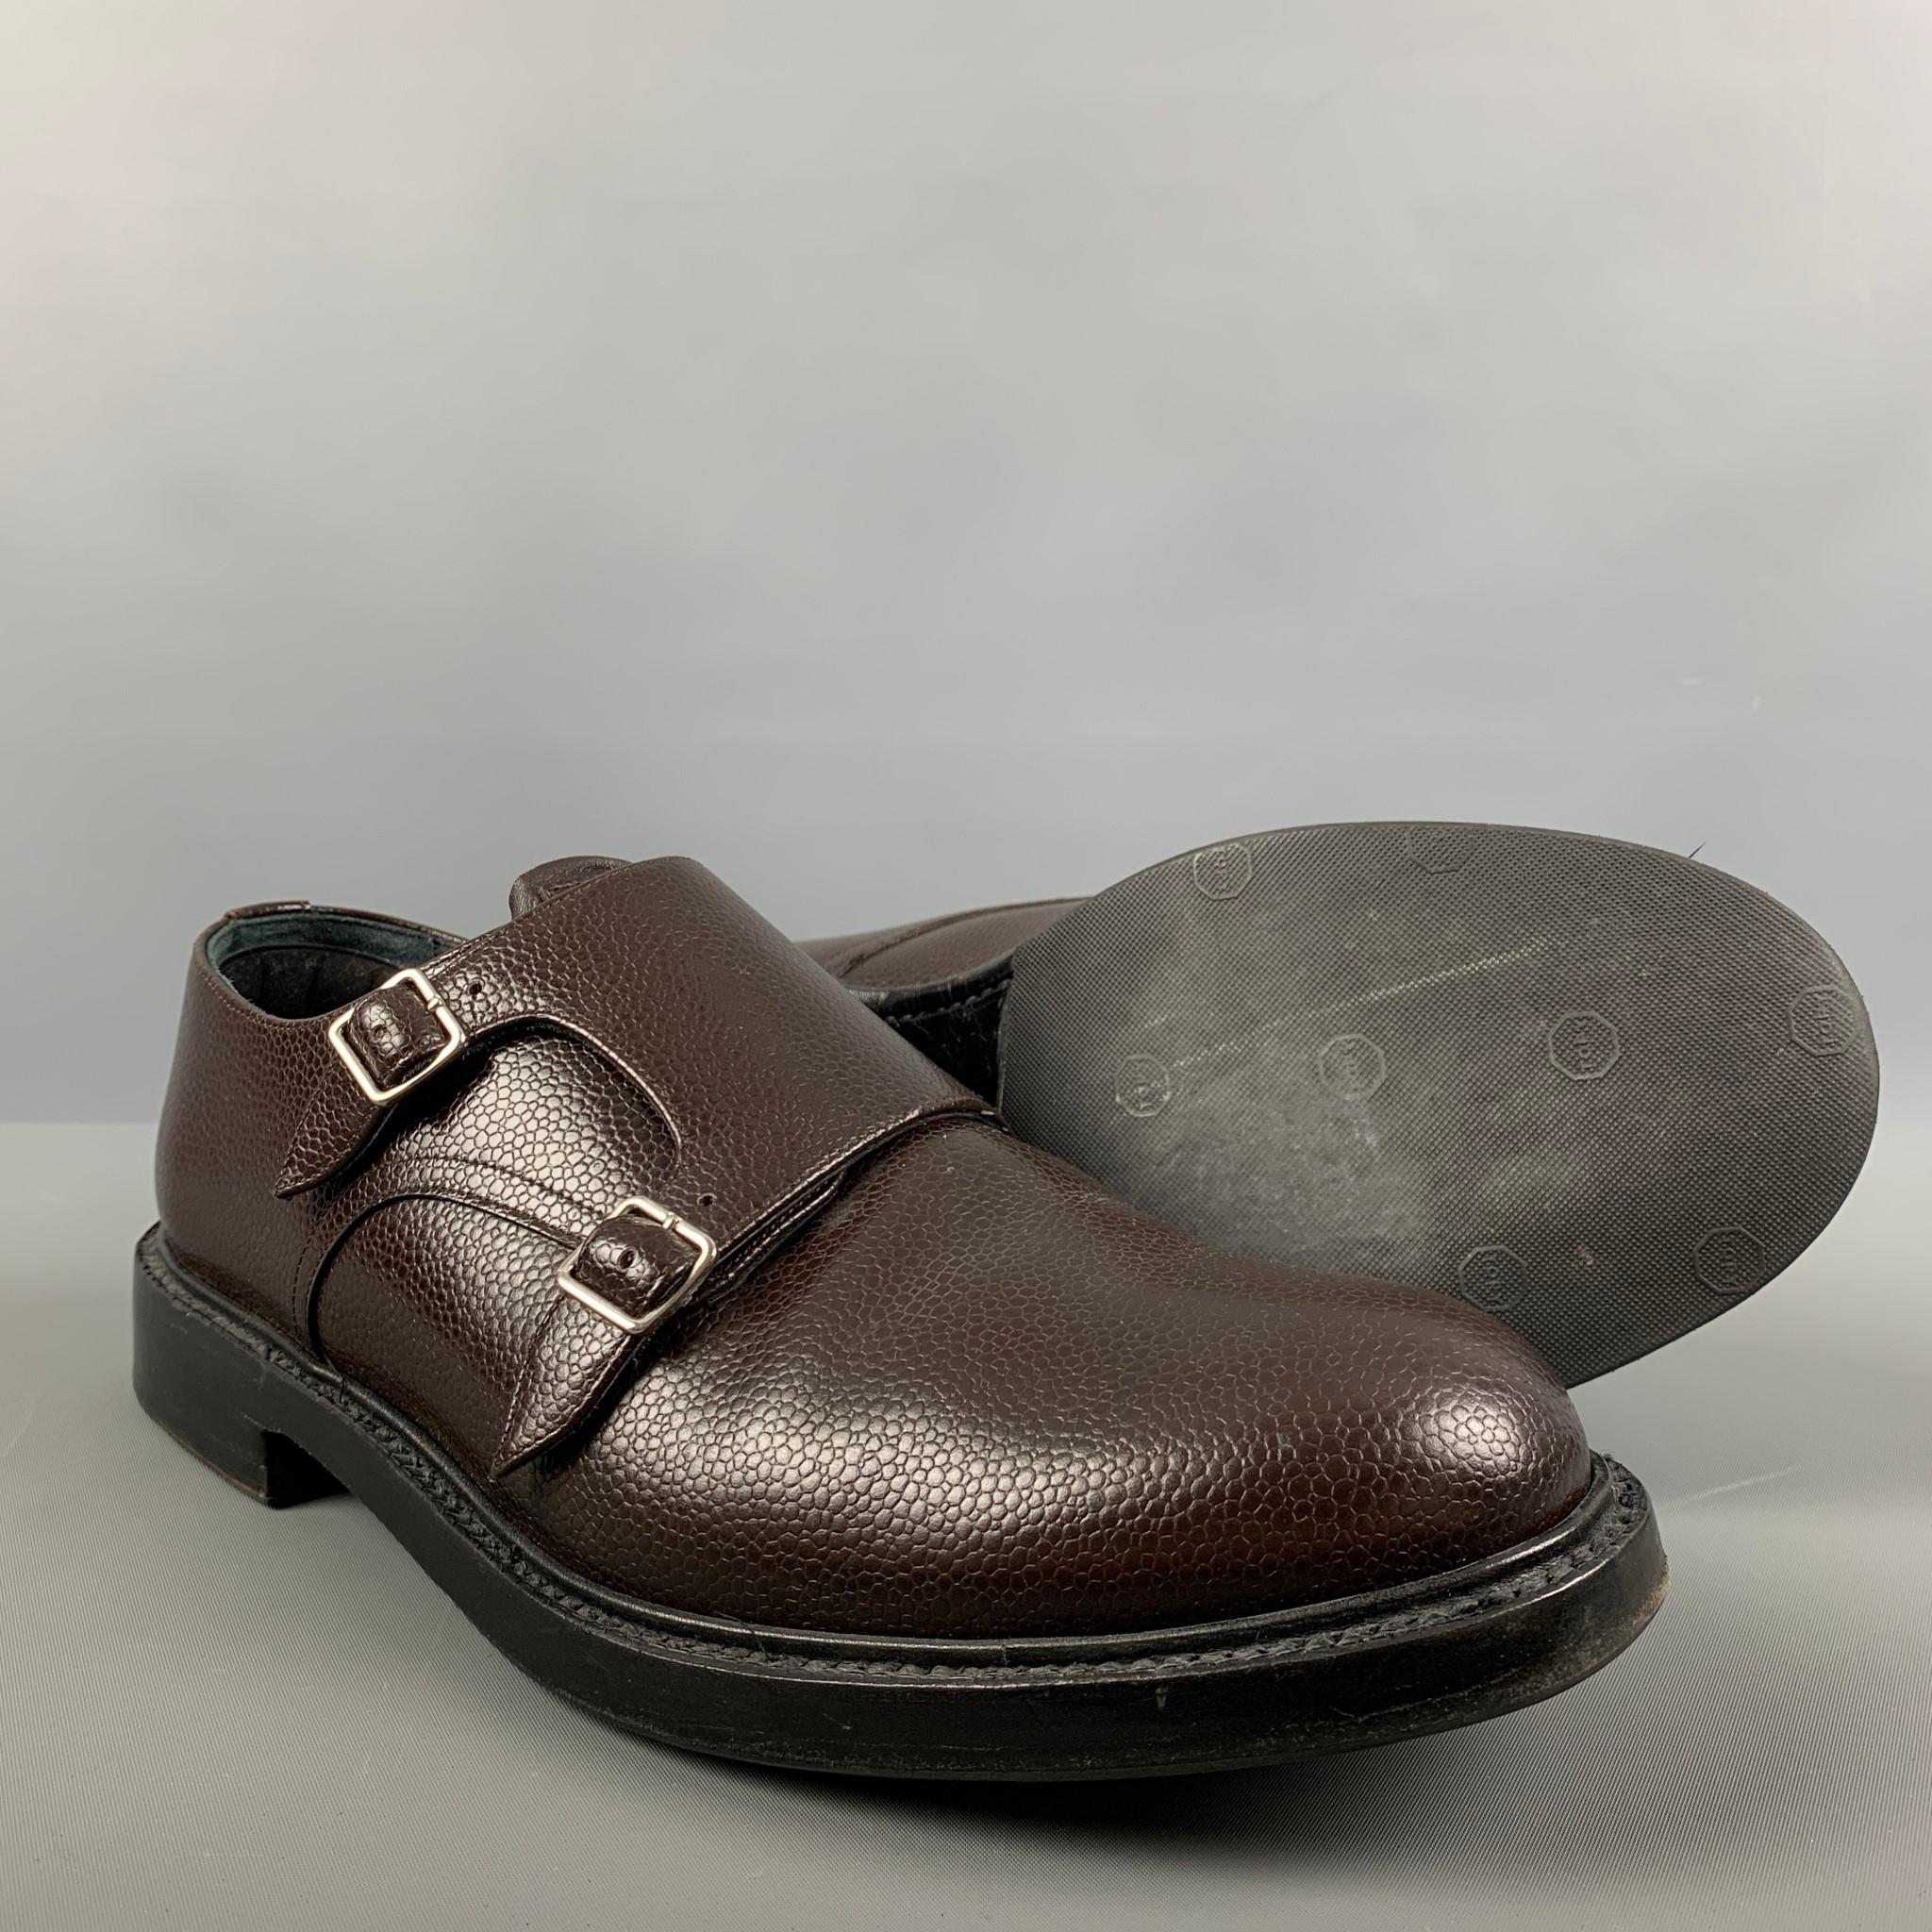 CALVIN KLEIN 205W39NYC Size 10 Brown Solid Leather Double Monk Strap Loafers 1